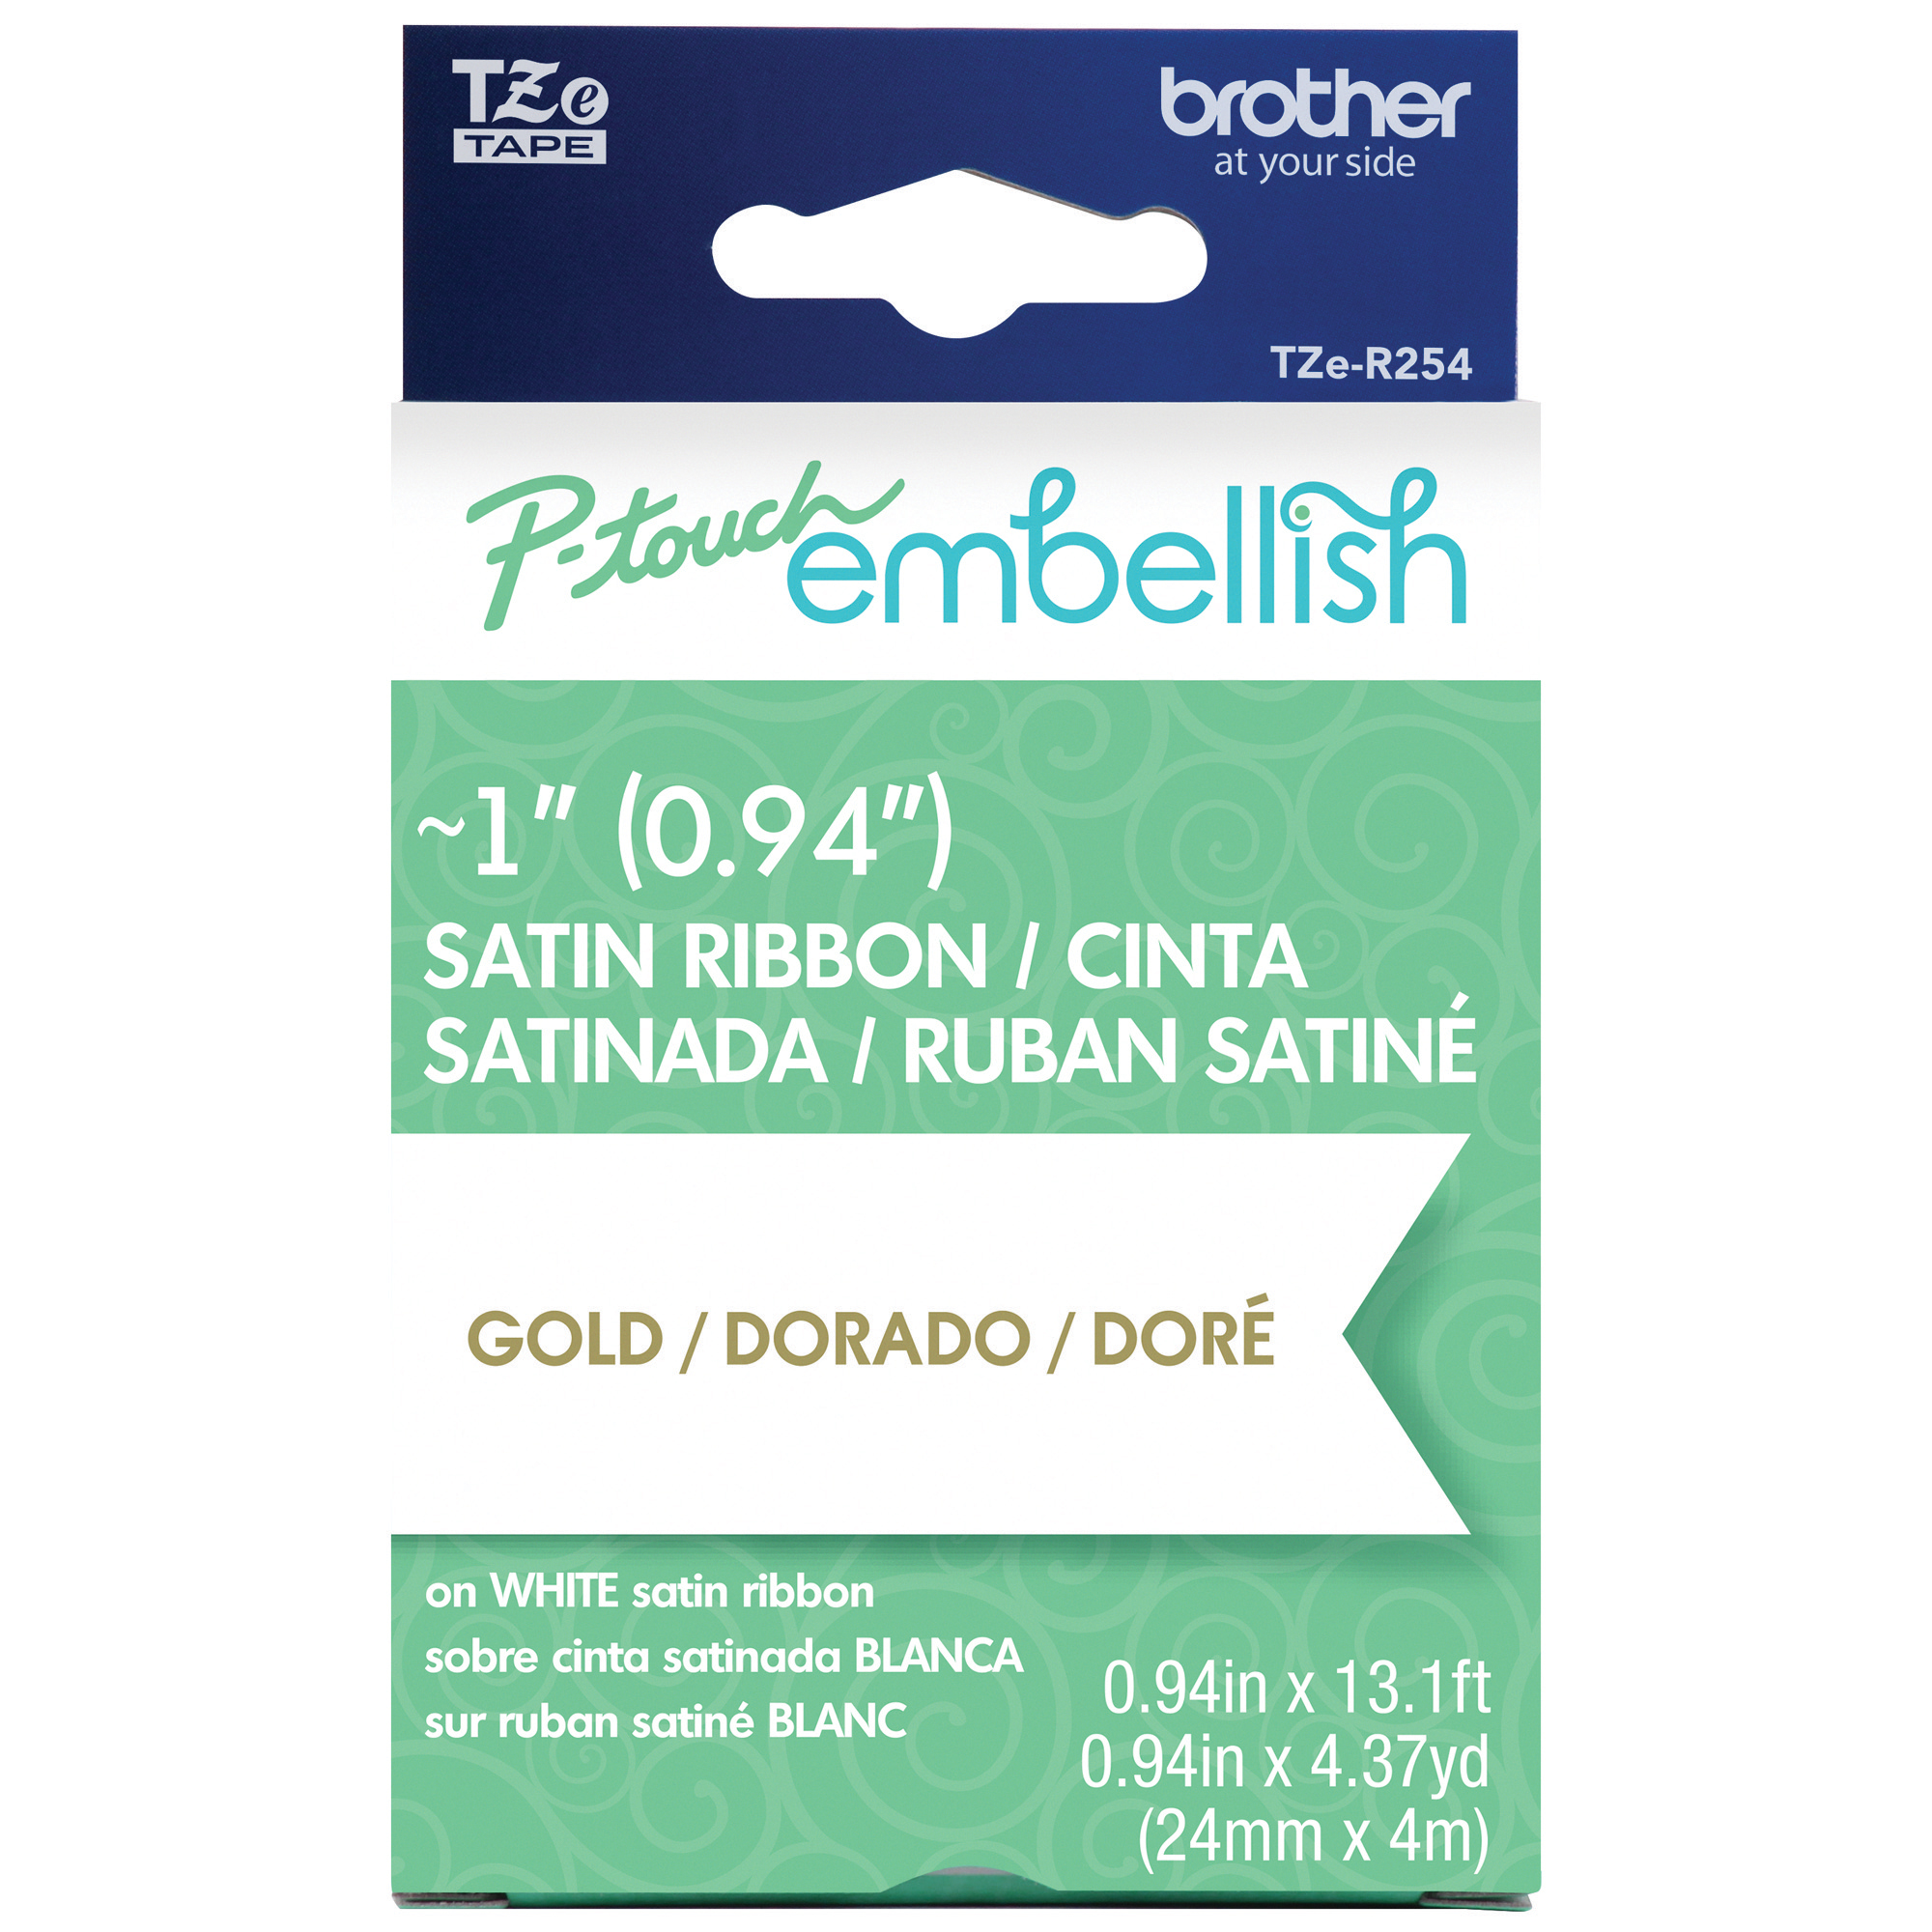 

Brother P-Touch Embellish Gold Print on White Satin Ribbon ~1" (24mm) x 13.1’ (4m)